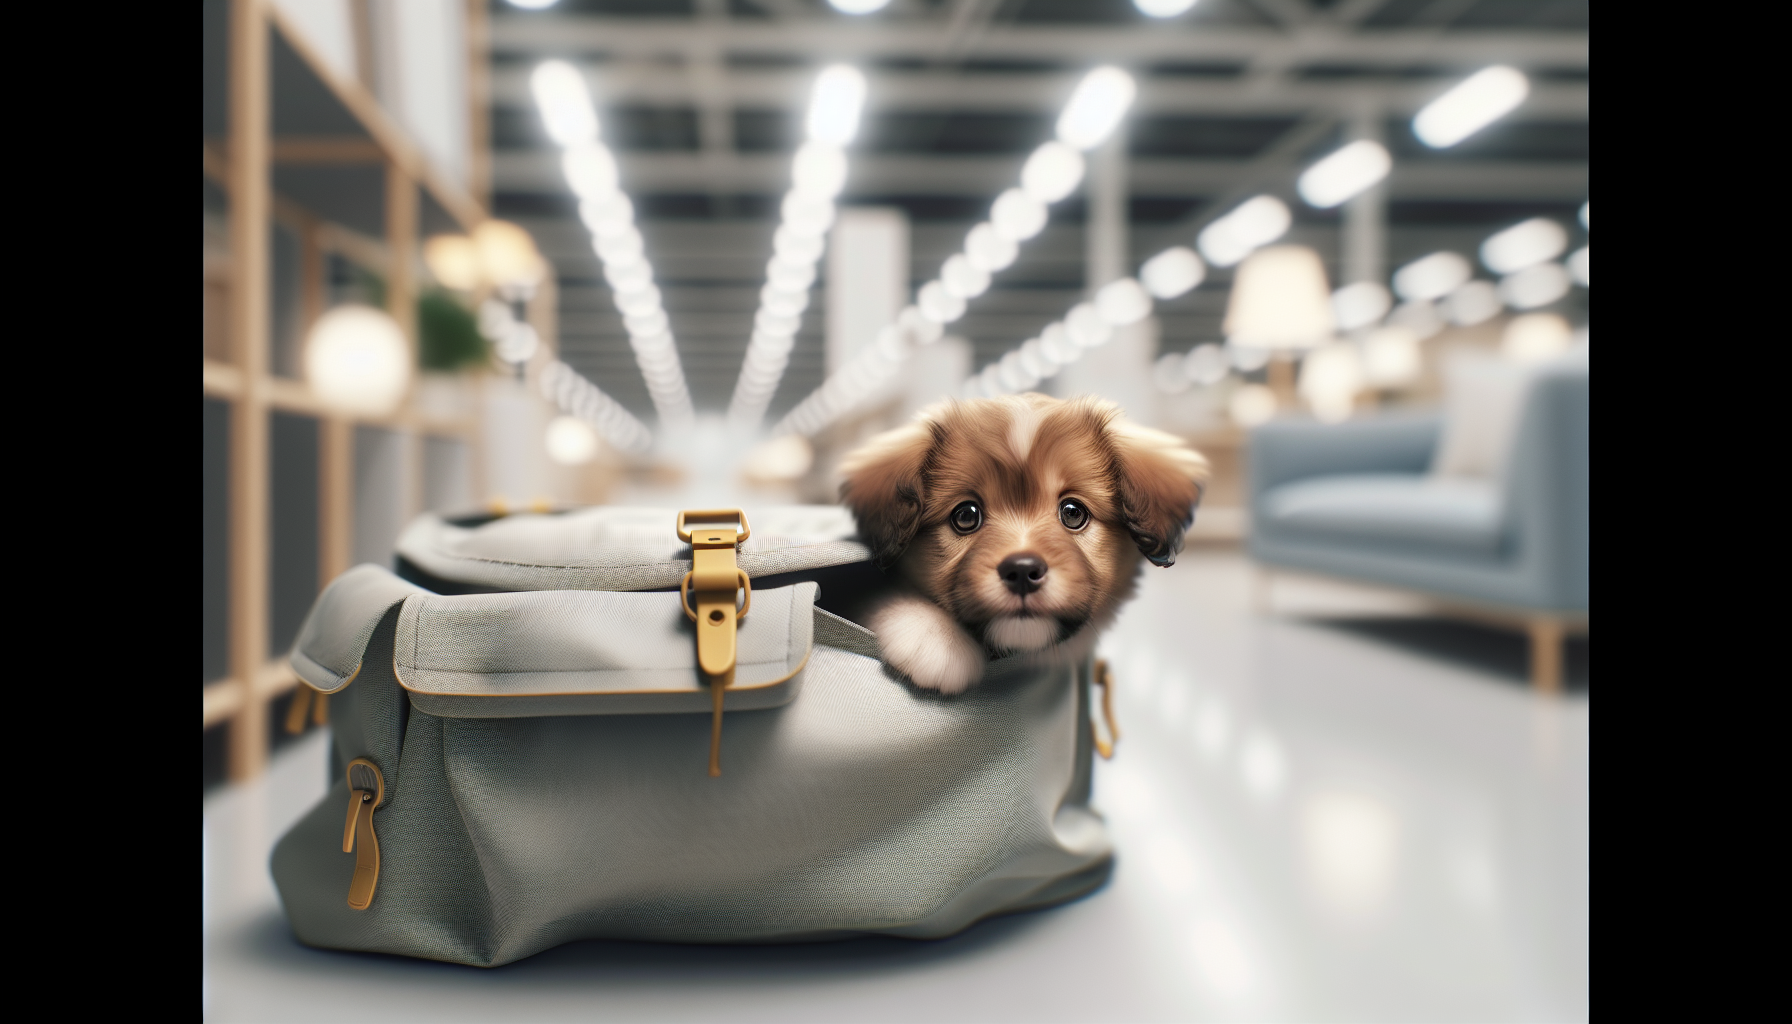 Can I Bring My Dog In A Backpack In IKEA?